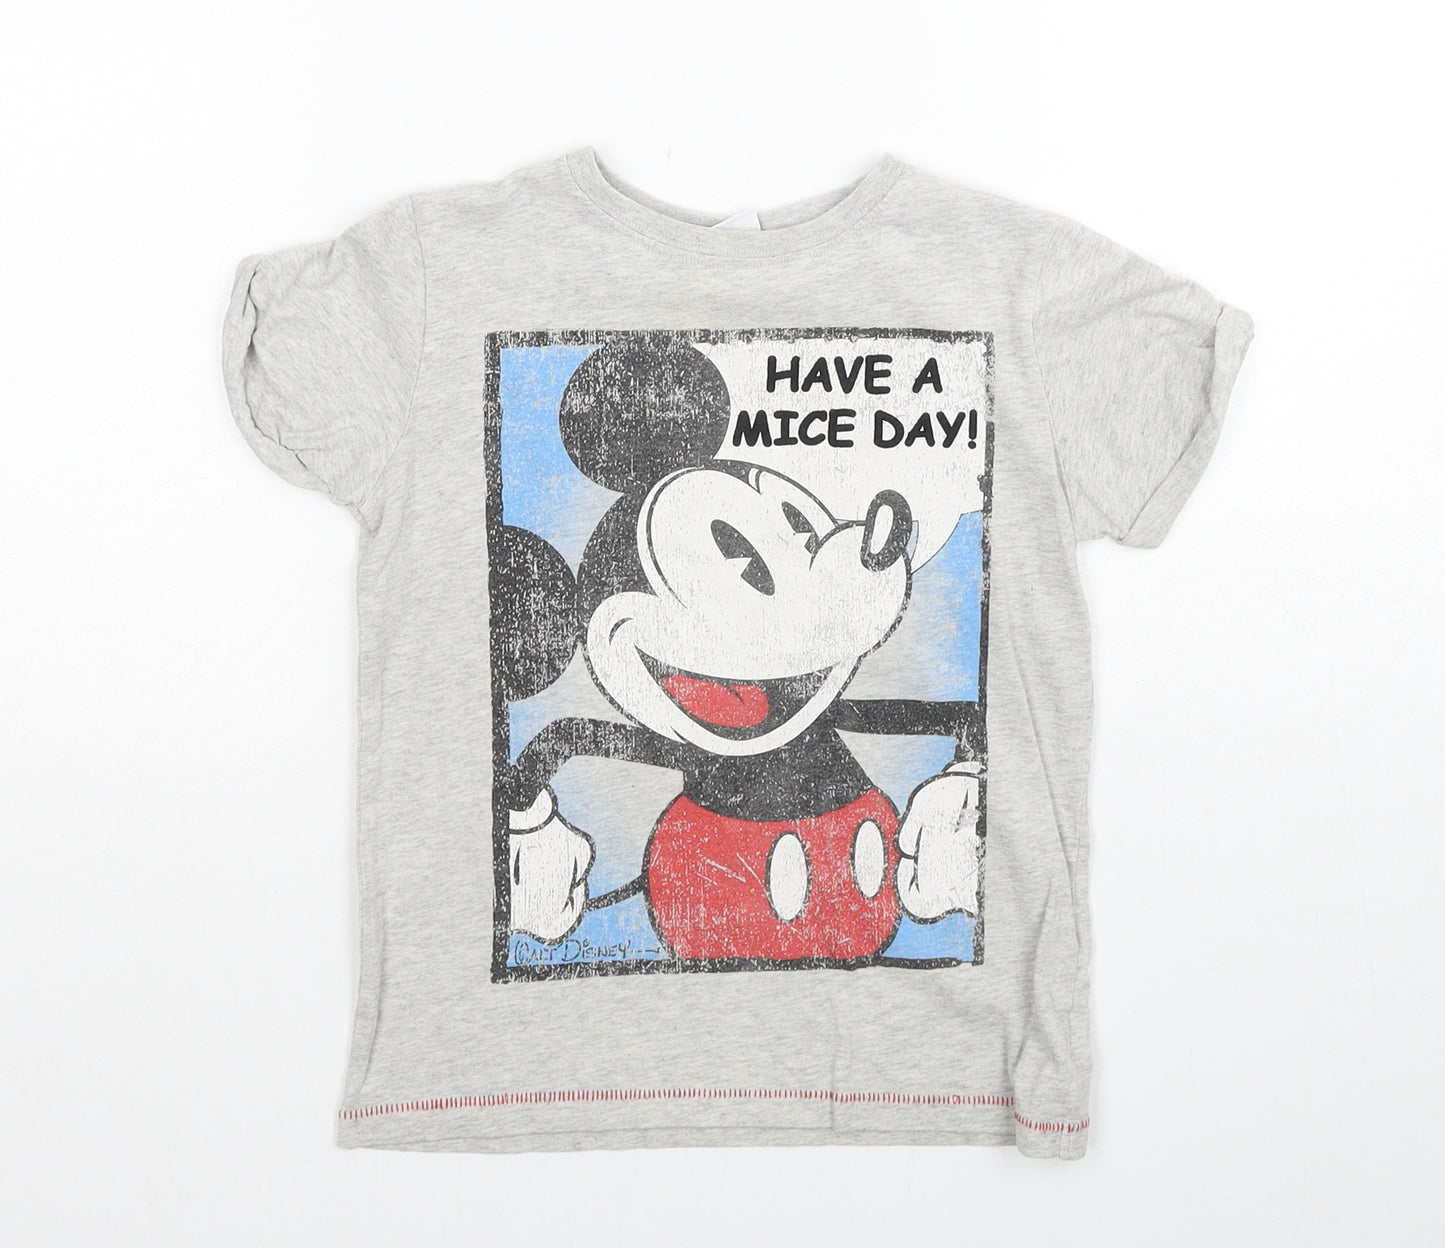 NEXT Boys Grey Cotton Basic T-Shirt Size 4-5 Years Round Neck Pullover - Mickey Mouse